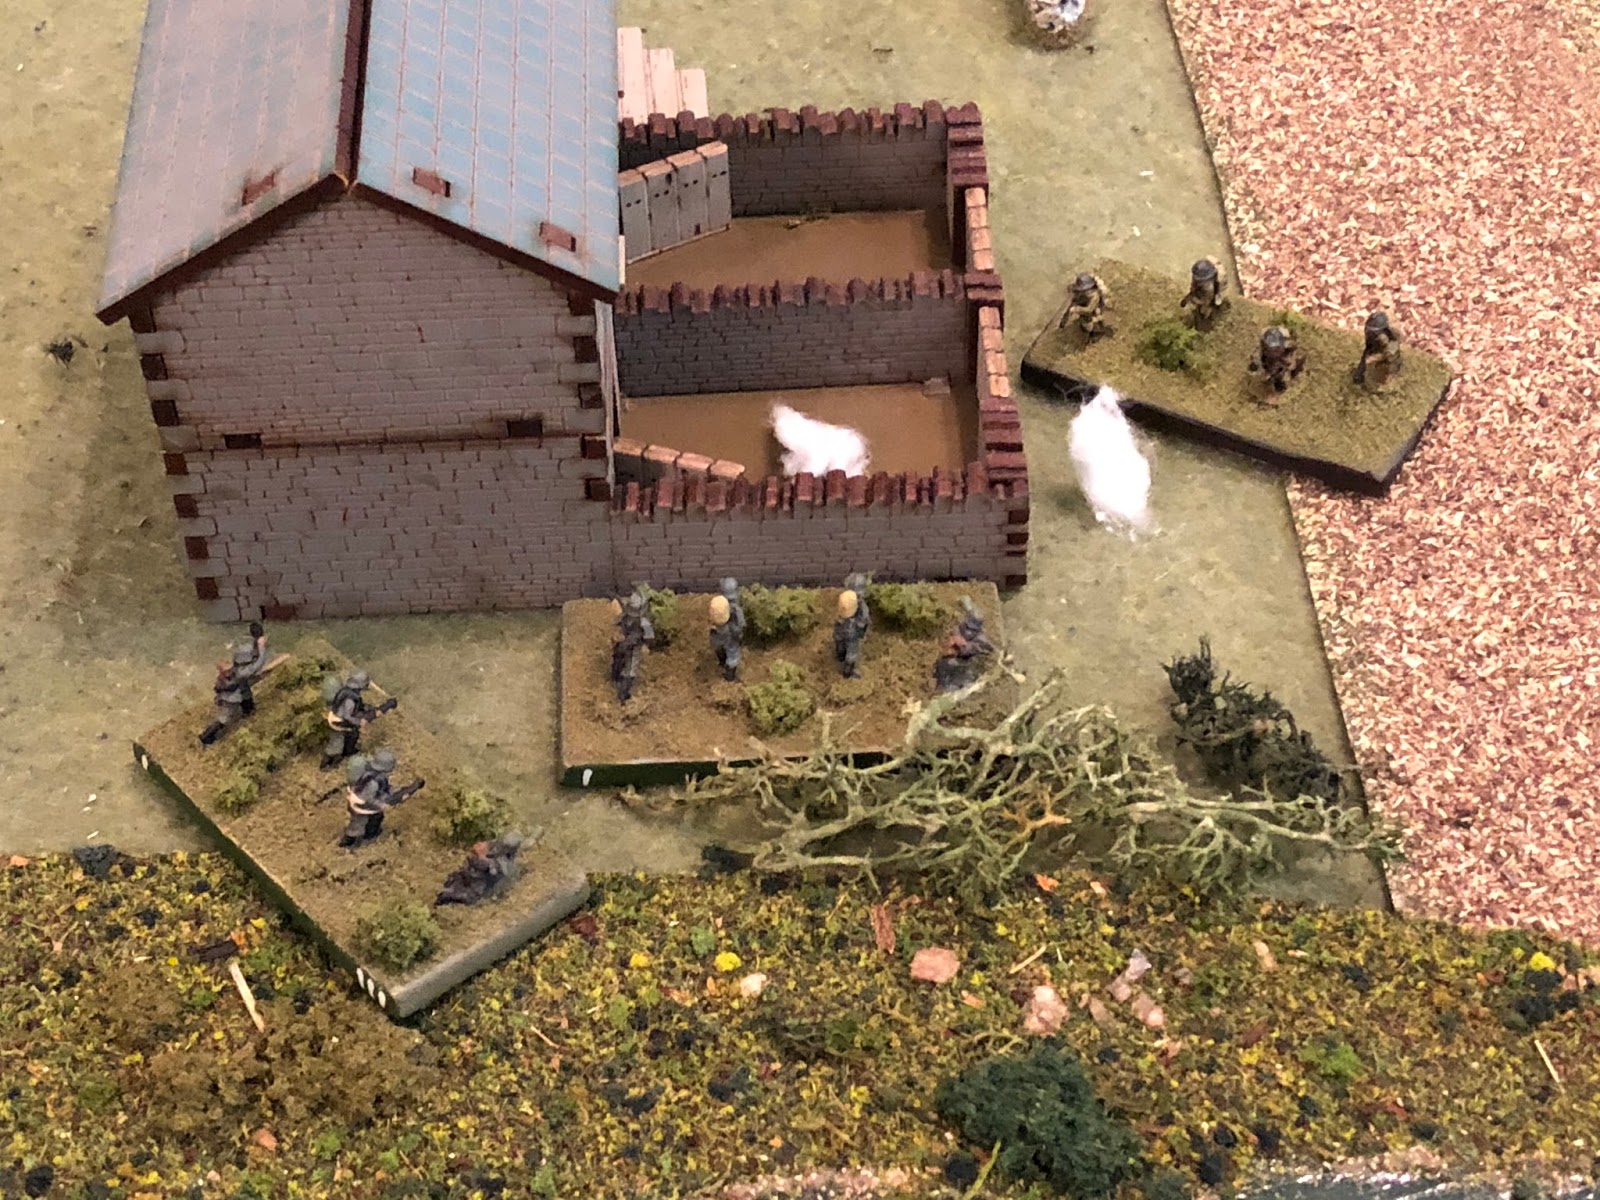  Sgt Barkstrom moves his squad over (bottom left) and rallies Sgt Hafl's squad back into the fight, just as Adrian helmets begin popping up over the wall to their right... 